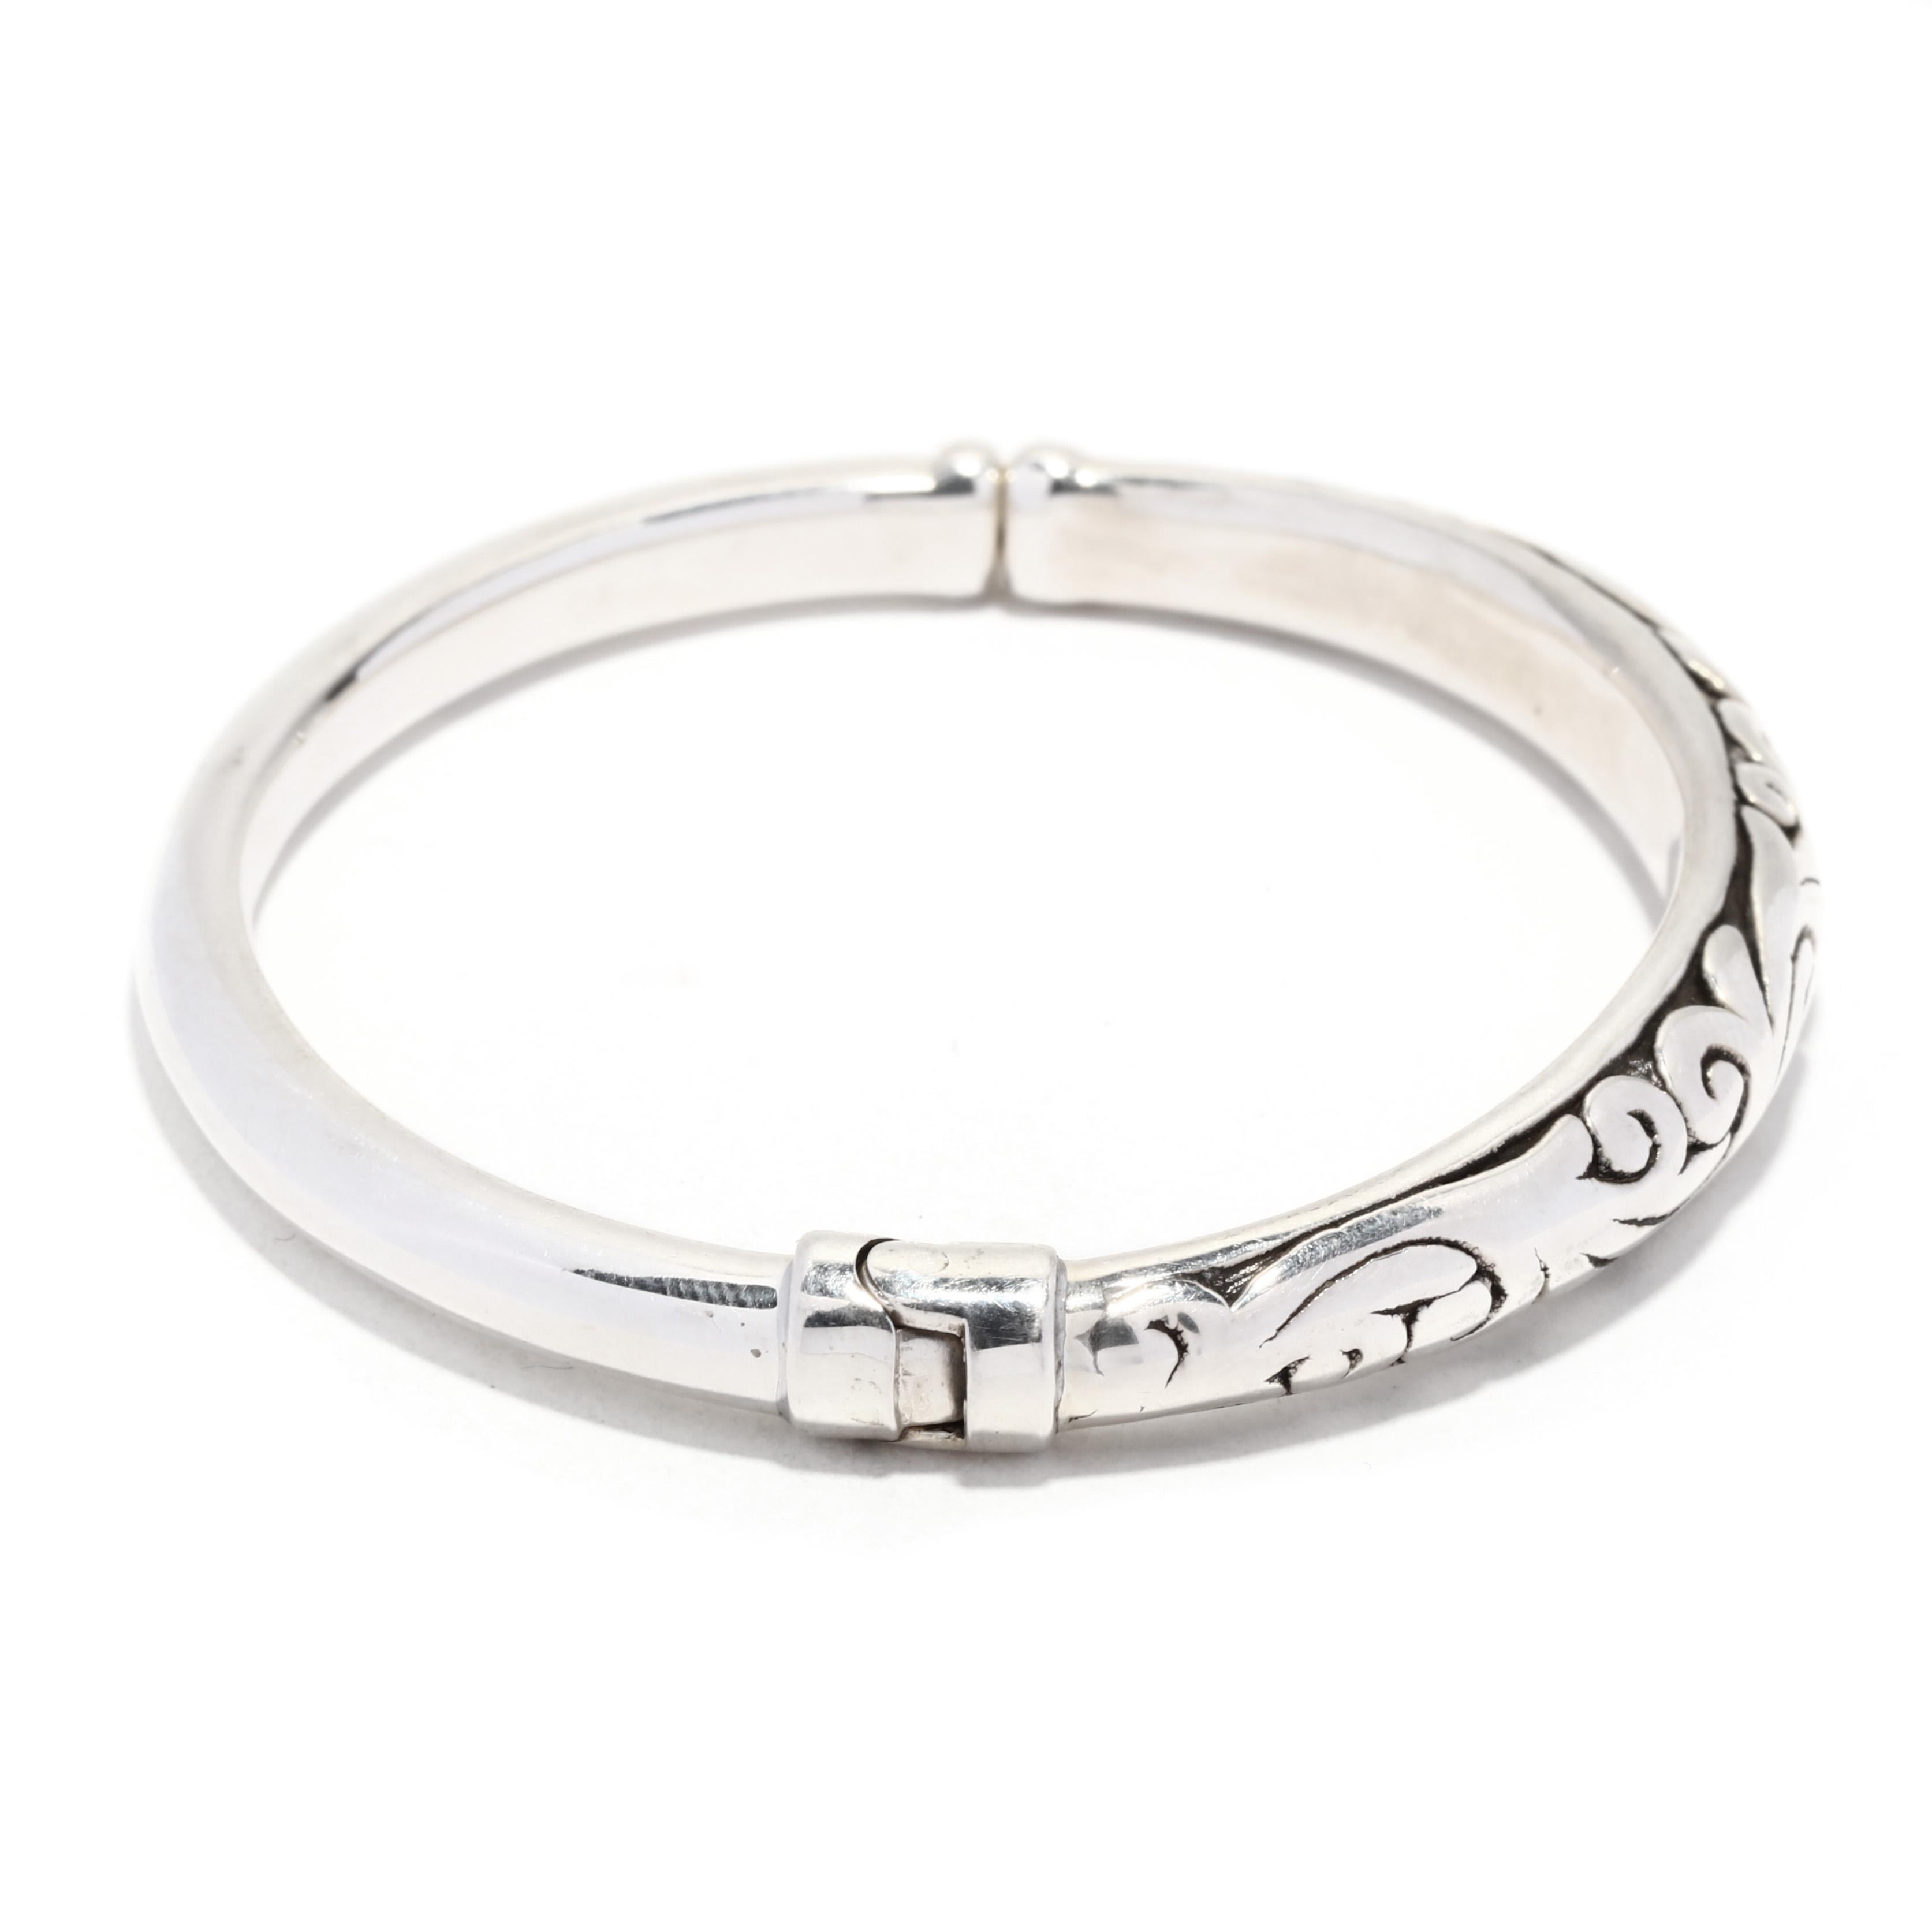 This vintage silver scroll bangle bracelet is the perfect addition to any jewelry collection! Crafted from sterling silver, this bangle measures 6.75 inches in length for a comfortable fit. The unique scroll design makes it perfect for stacking with